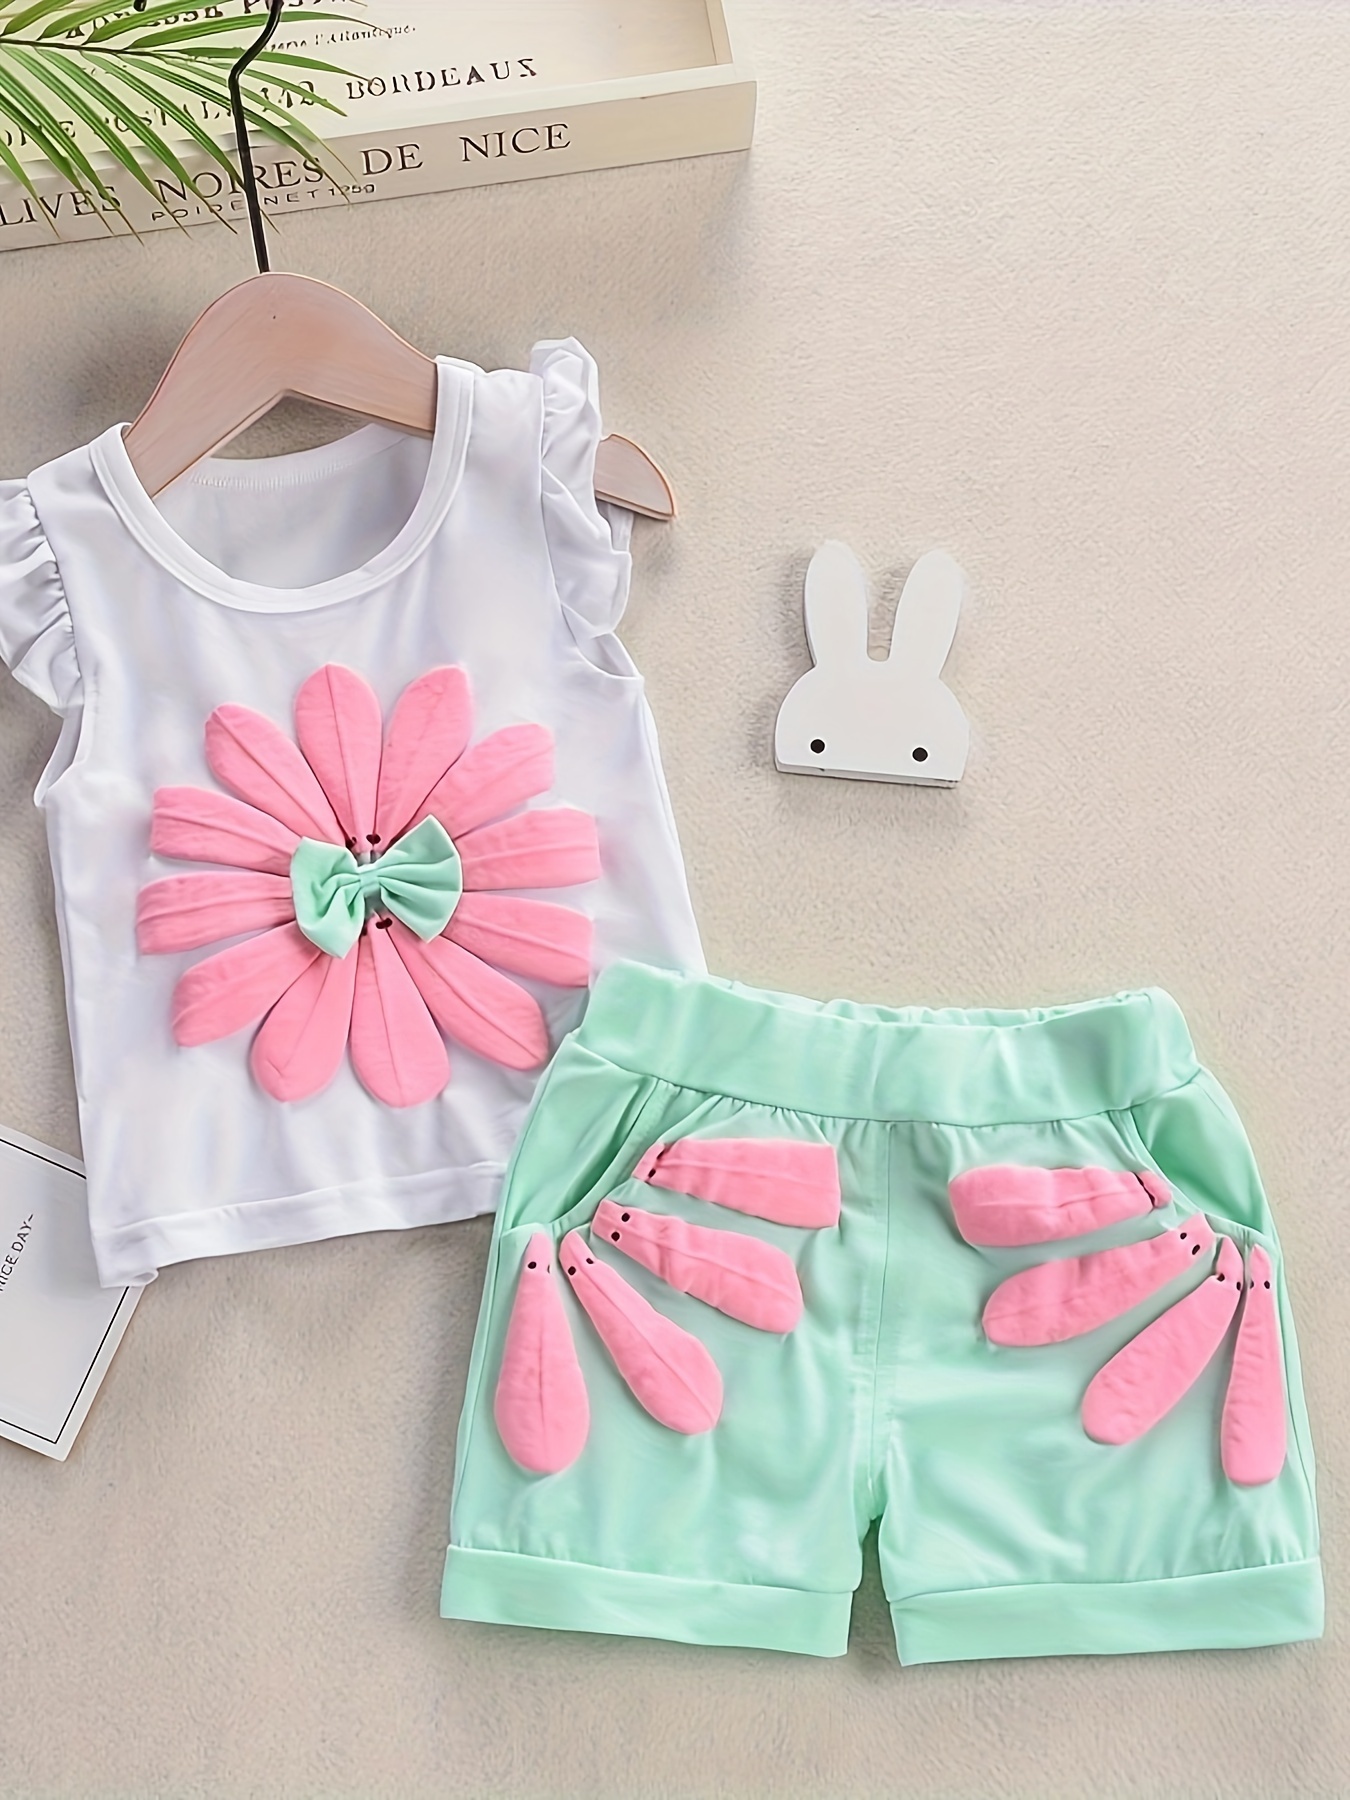 Little Girls Outfit Baby Girl 2 Piece Clothes Set Summer Cotton